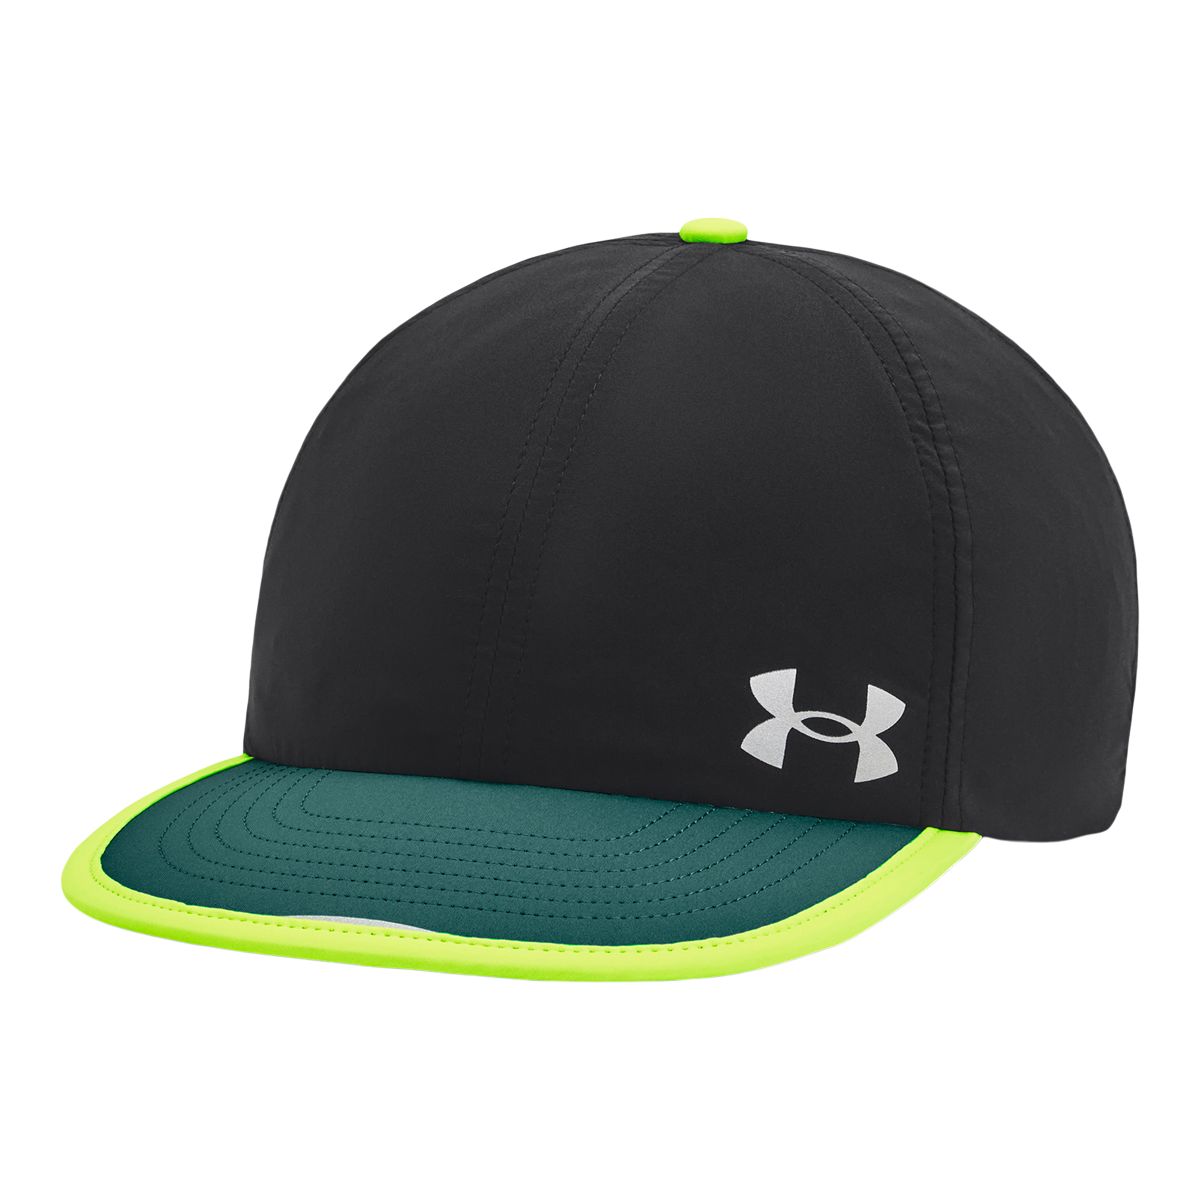 Under Armour Men's Iso-Chill Launch Snapback Hat